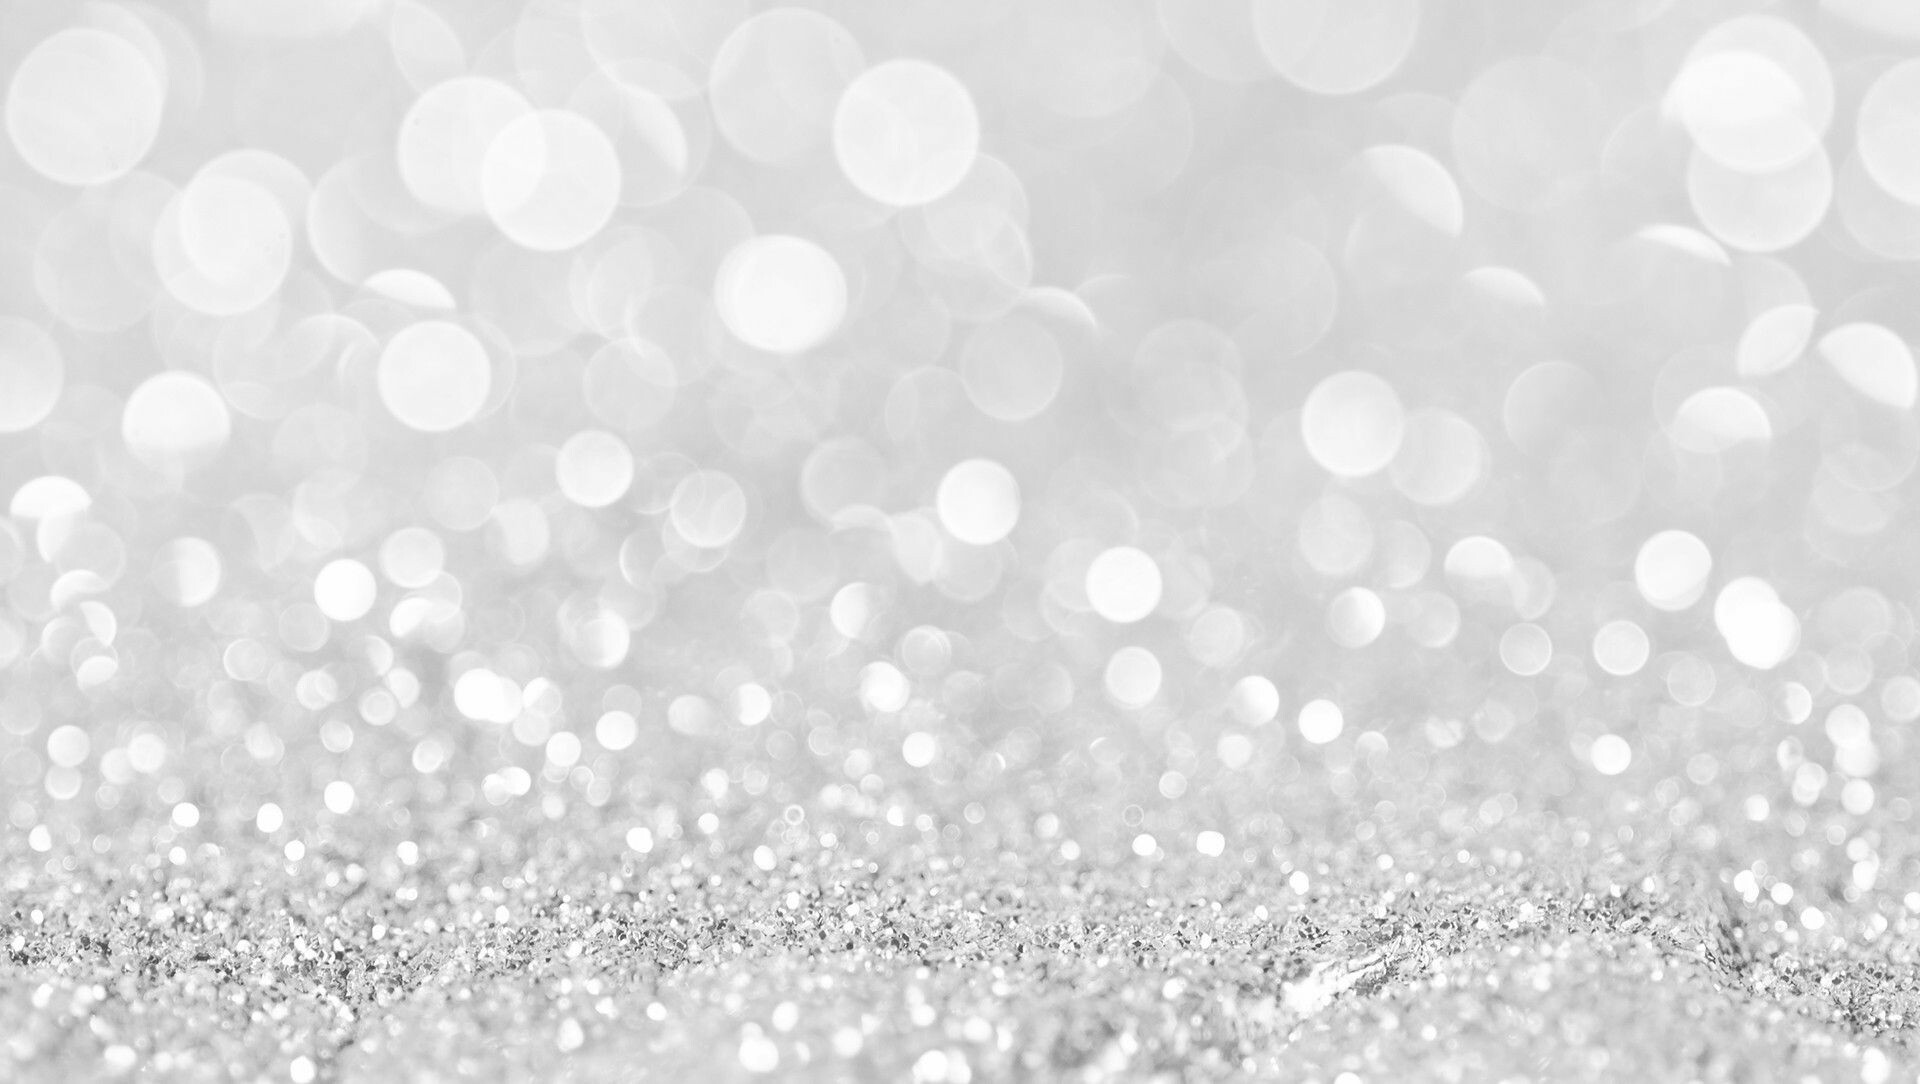 Sparkle: White glitter, Sequins were sewn or woven on to fabric to give it a shiny appearance. 1920x1090 HD Wallpaper.